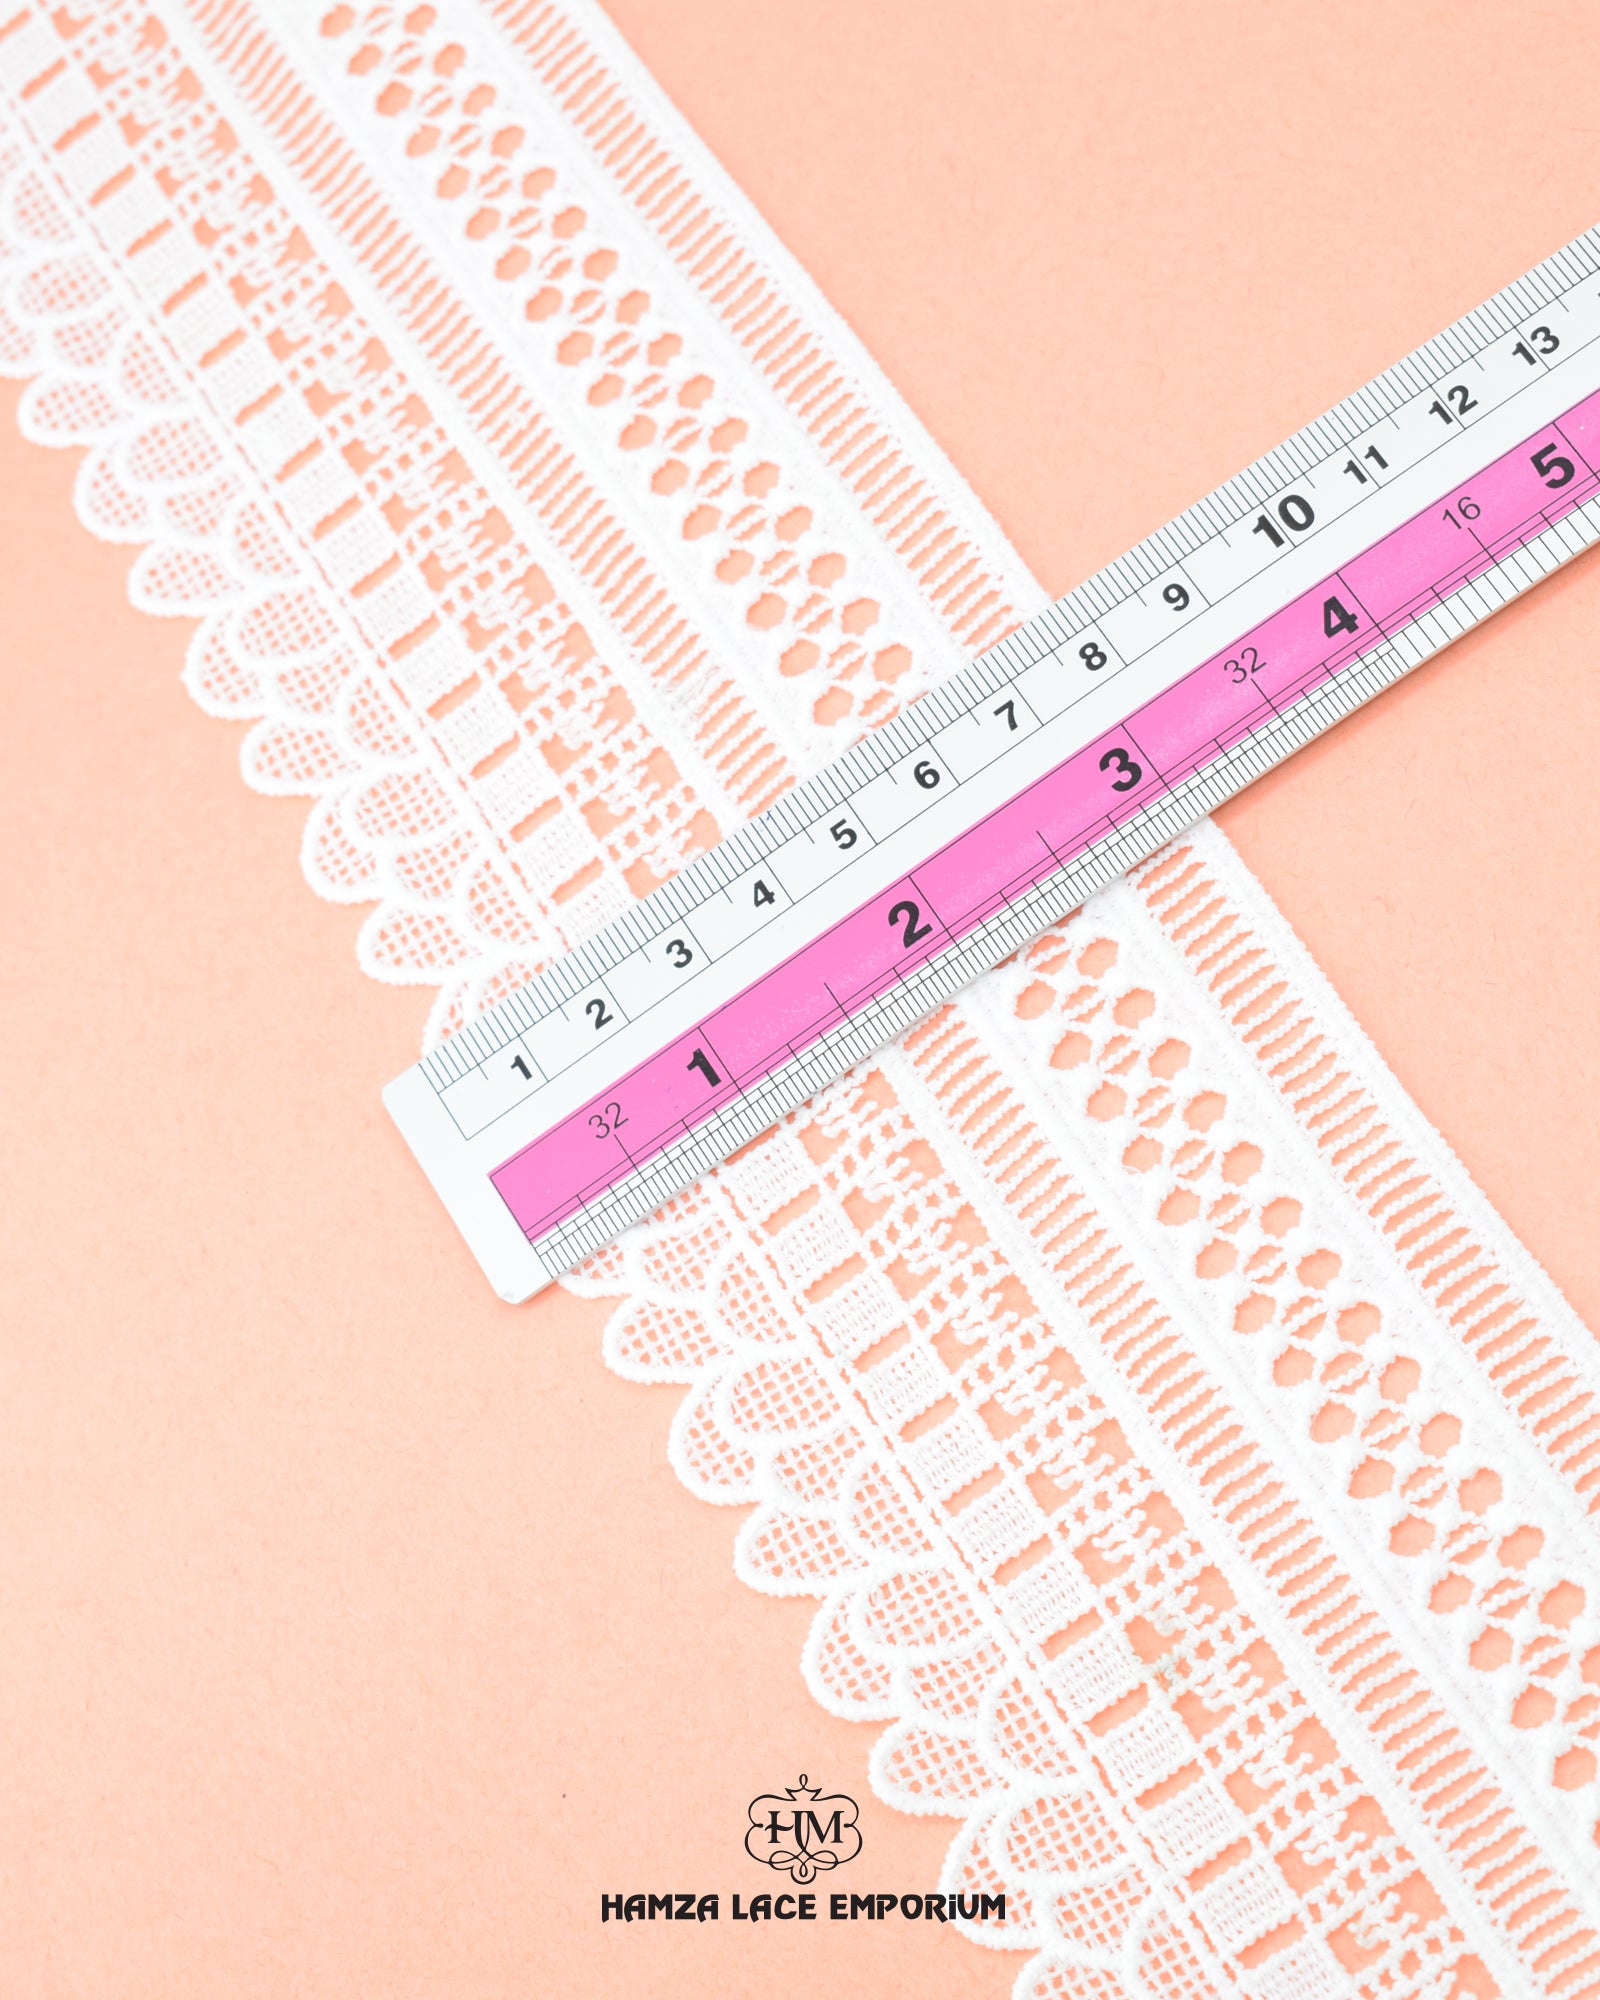 The size of the 'Edging Lace 22166' is given with the help of a ruler.